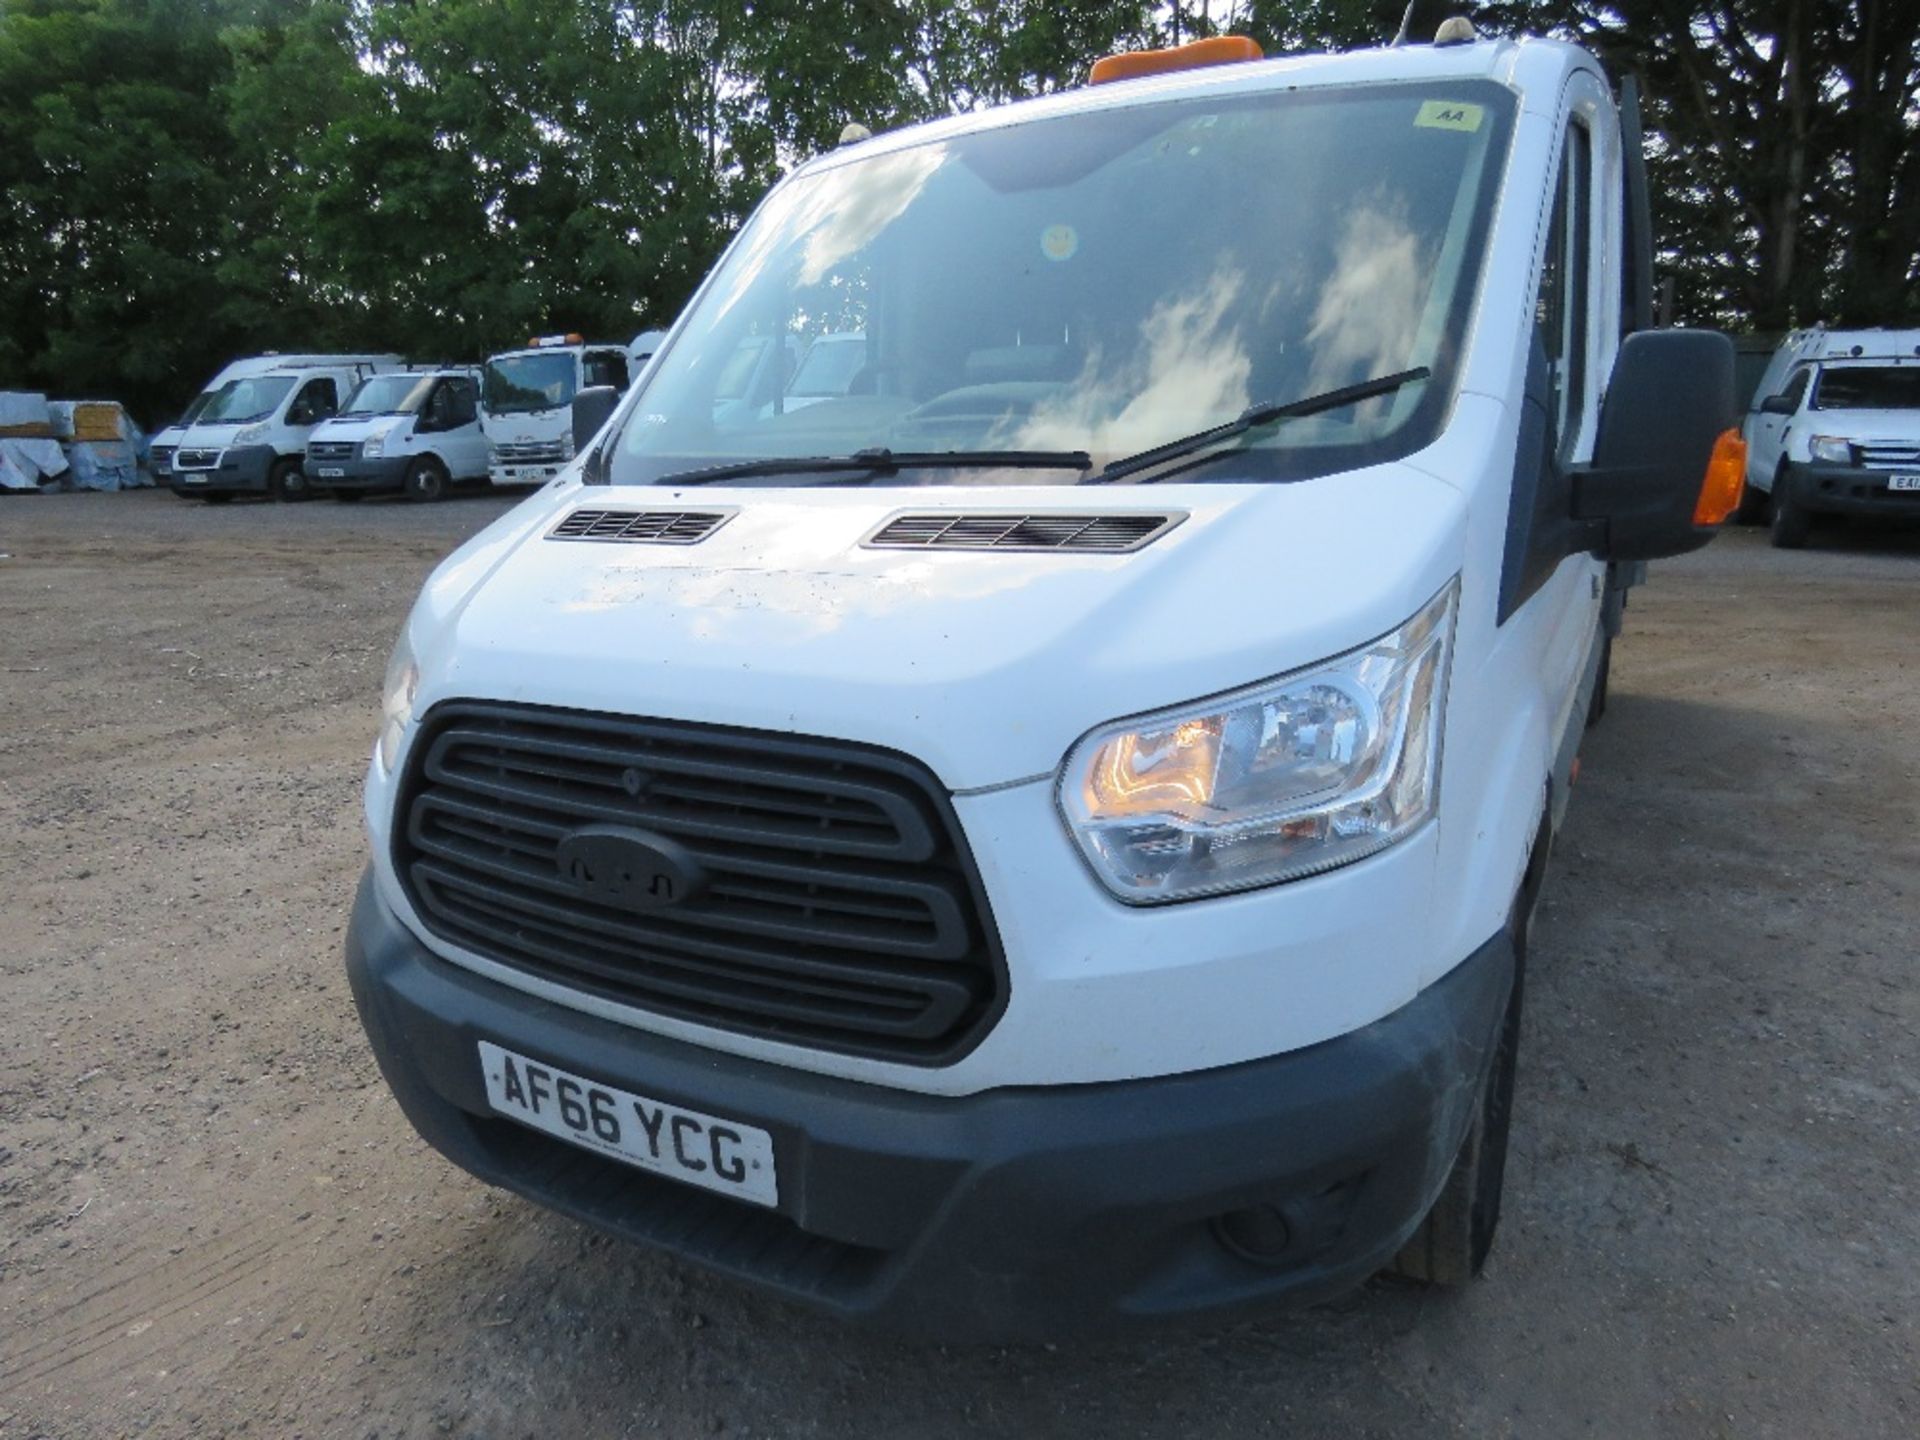 FORD TRANSIT DOUBLE / CREW CAB TIPPER TRUCK REG:AF66 YCG. WITH V5 AND MOT UNTIL 29TH SEPTEMBER 2023. - Image 3 of 17